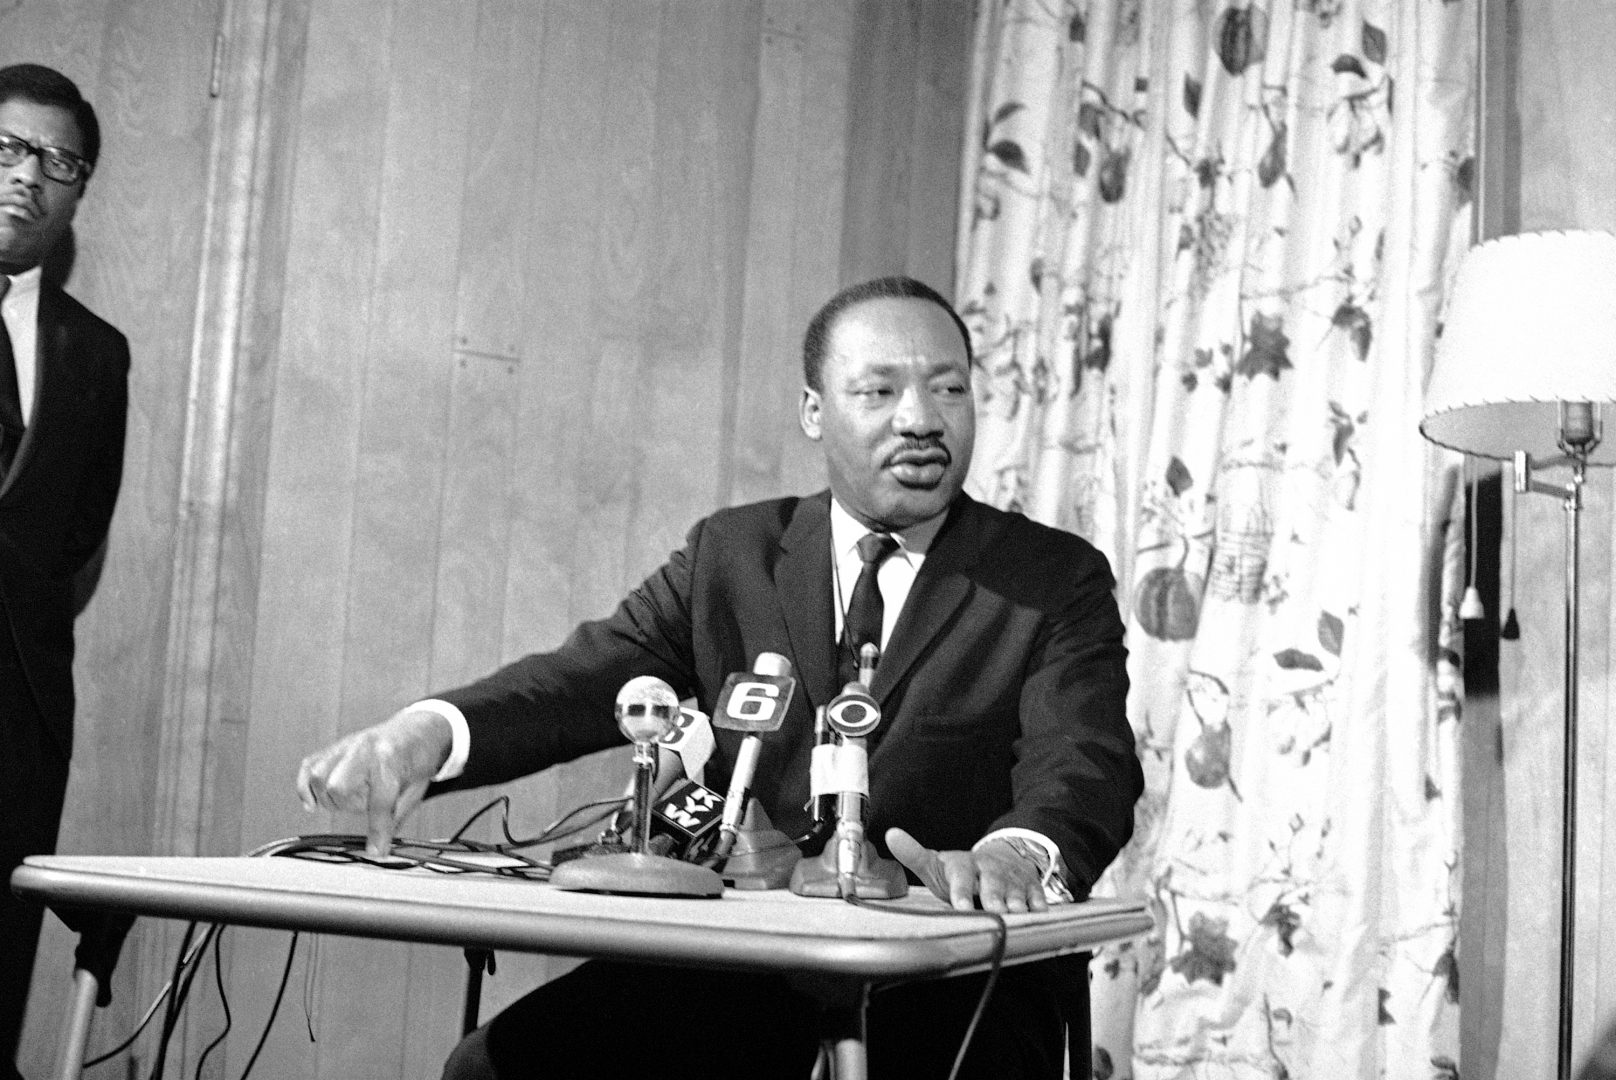 Dr. Martin Luther King, of the Southern Christian Leadership Conference, tells a news conference in Philadelphia  Feb. 9, 1968 that he will go to Washington in April with thousands of supporters to demand a comprehensive job and income program from the Federal Government. He opened the first office in Philadelphia  February 9 in conjunction with this effort. Dr. King said that the temper of the program will be nonviolent, but his people will be prepared to stay until the government responds and legislation to that aim is reached. (AP Photo)